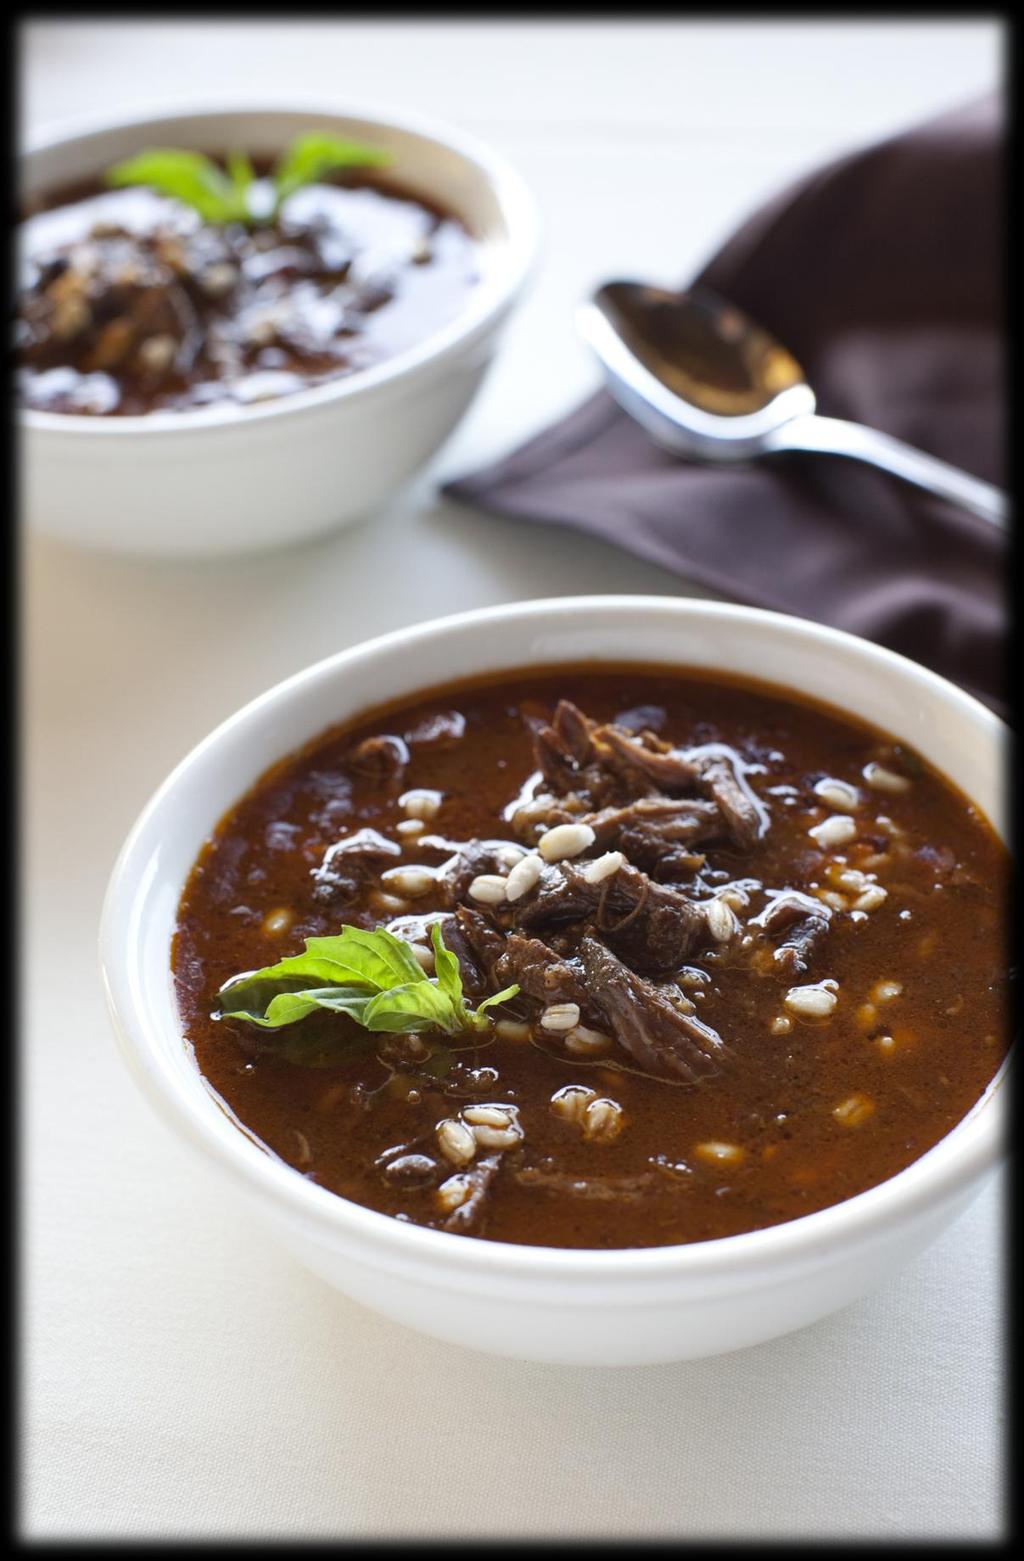 Beef Short Ribs, Basil & Barley Soup (Serves: 6) Ingredients: 16 oz. short rib steak no bones, cut into bite size pieces about ¼ of an inch ½ tsp. freshly ground pepper 3 tbsp.